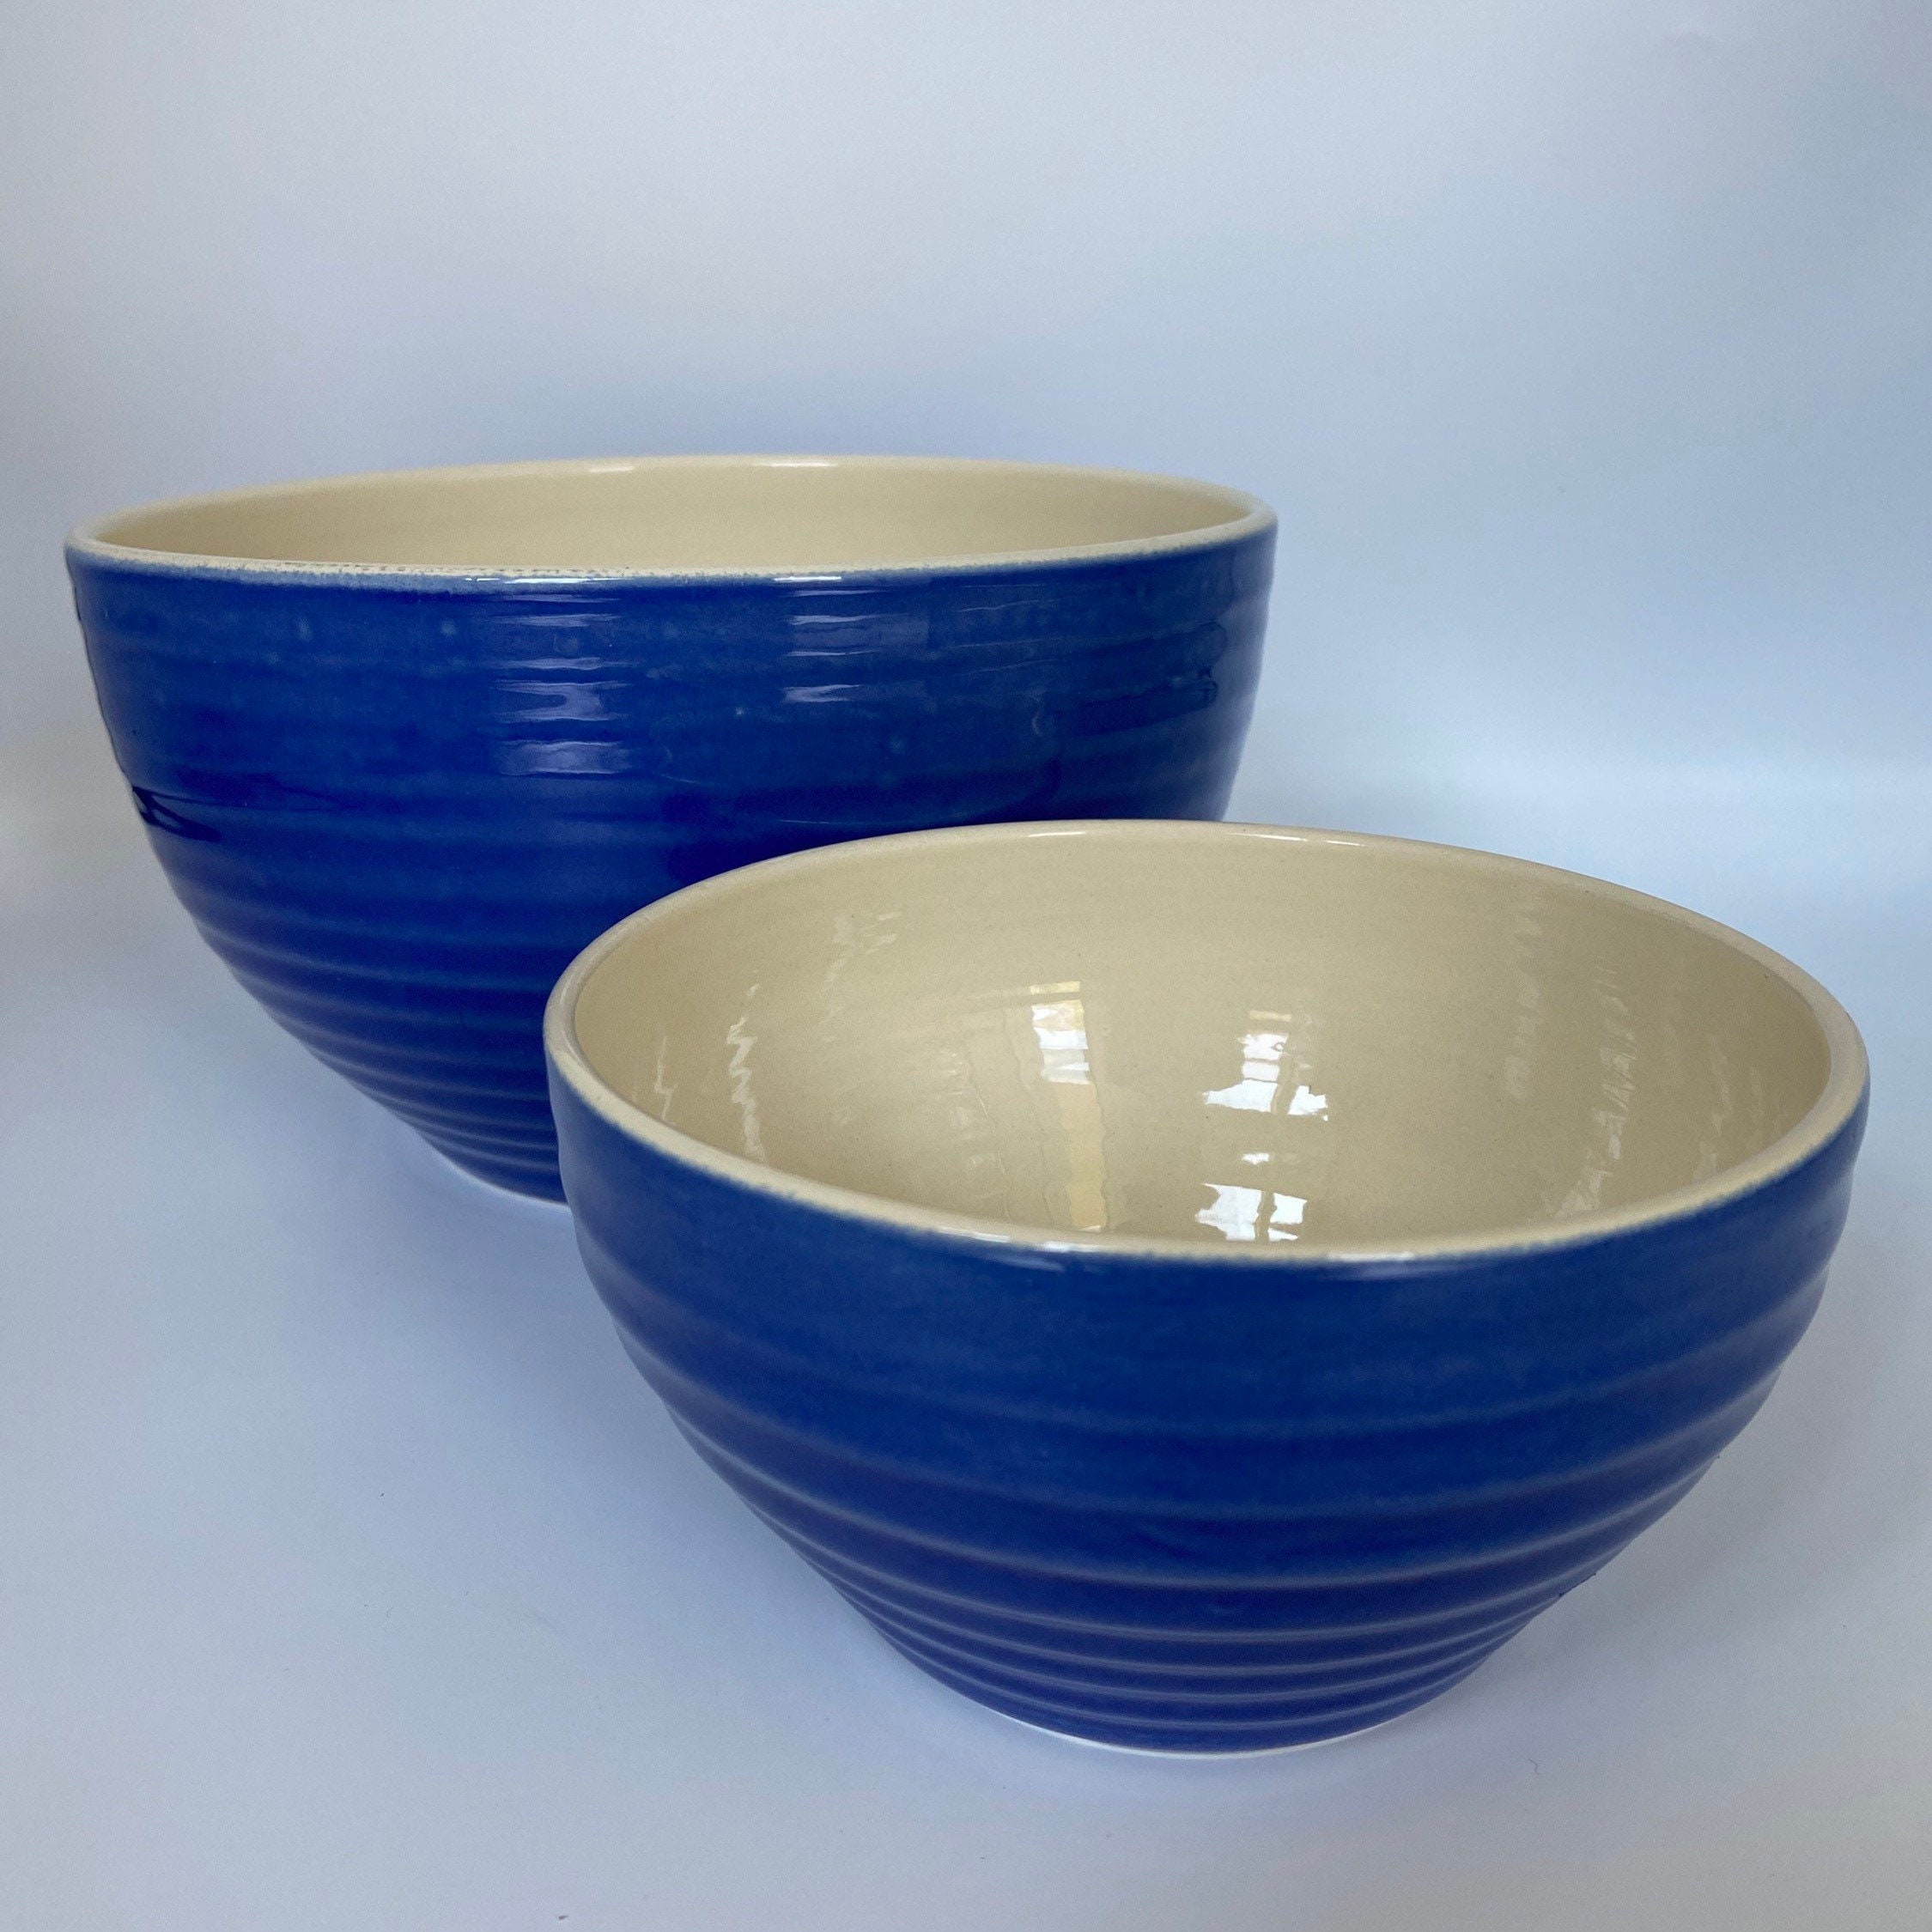 Emile Henry > Mixing Bowls > Large Mixing Bowl (Blue Flame) - Lewis Gifts